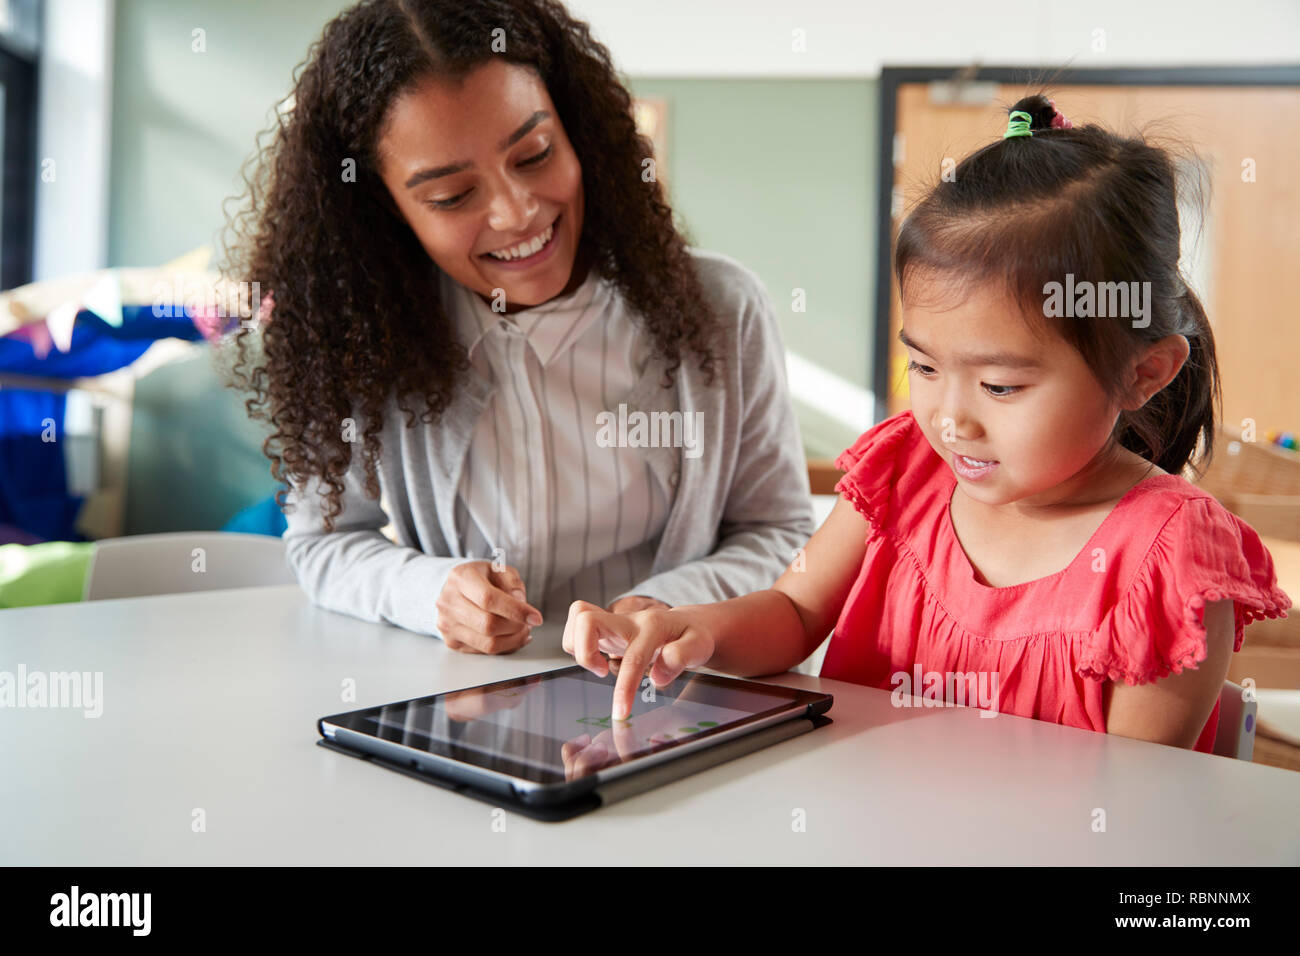 Female infant school teacher working one on one with a Chinese schoolgirl, sitting at a table in a classroom using a tablet computer, close up Stock Photo